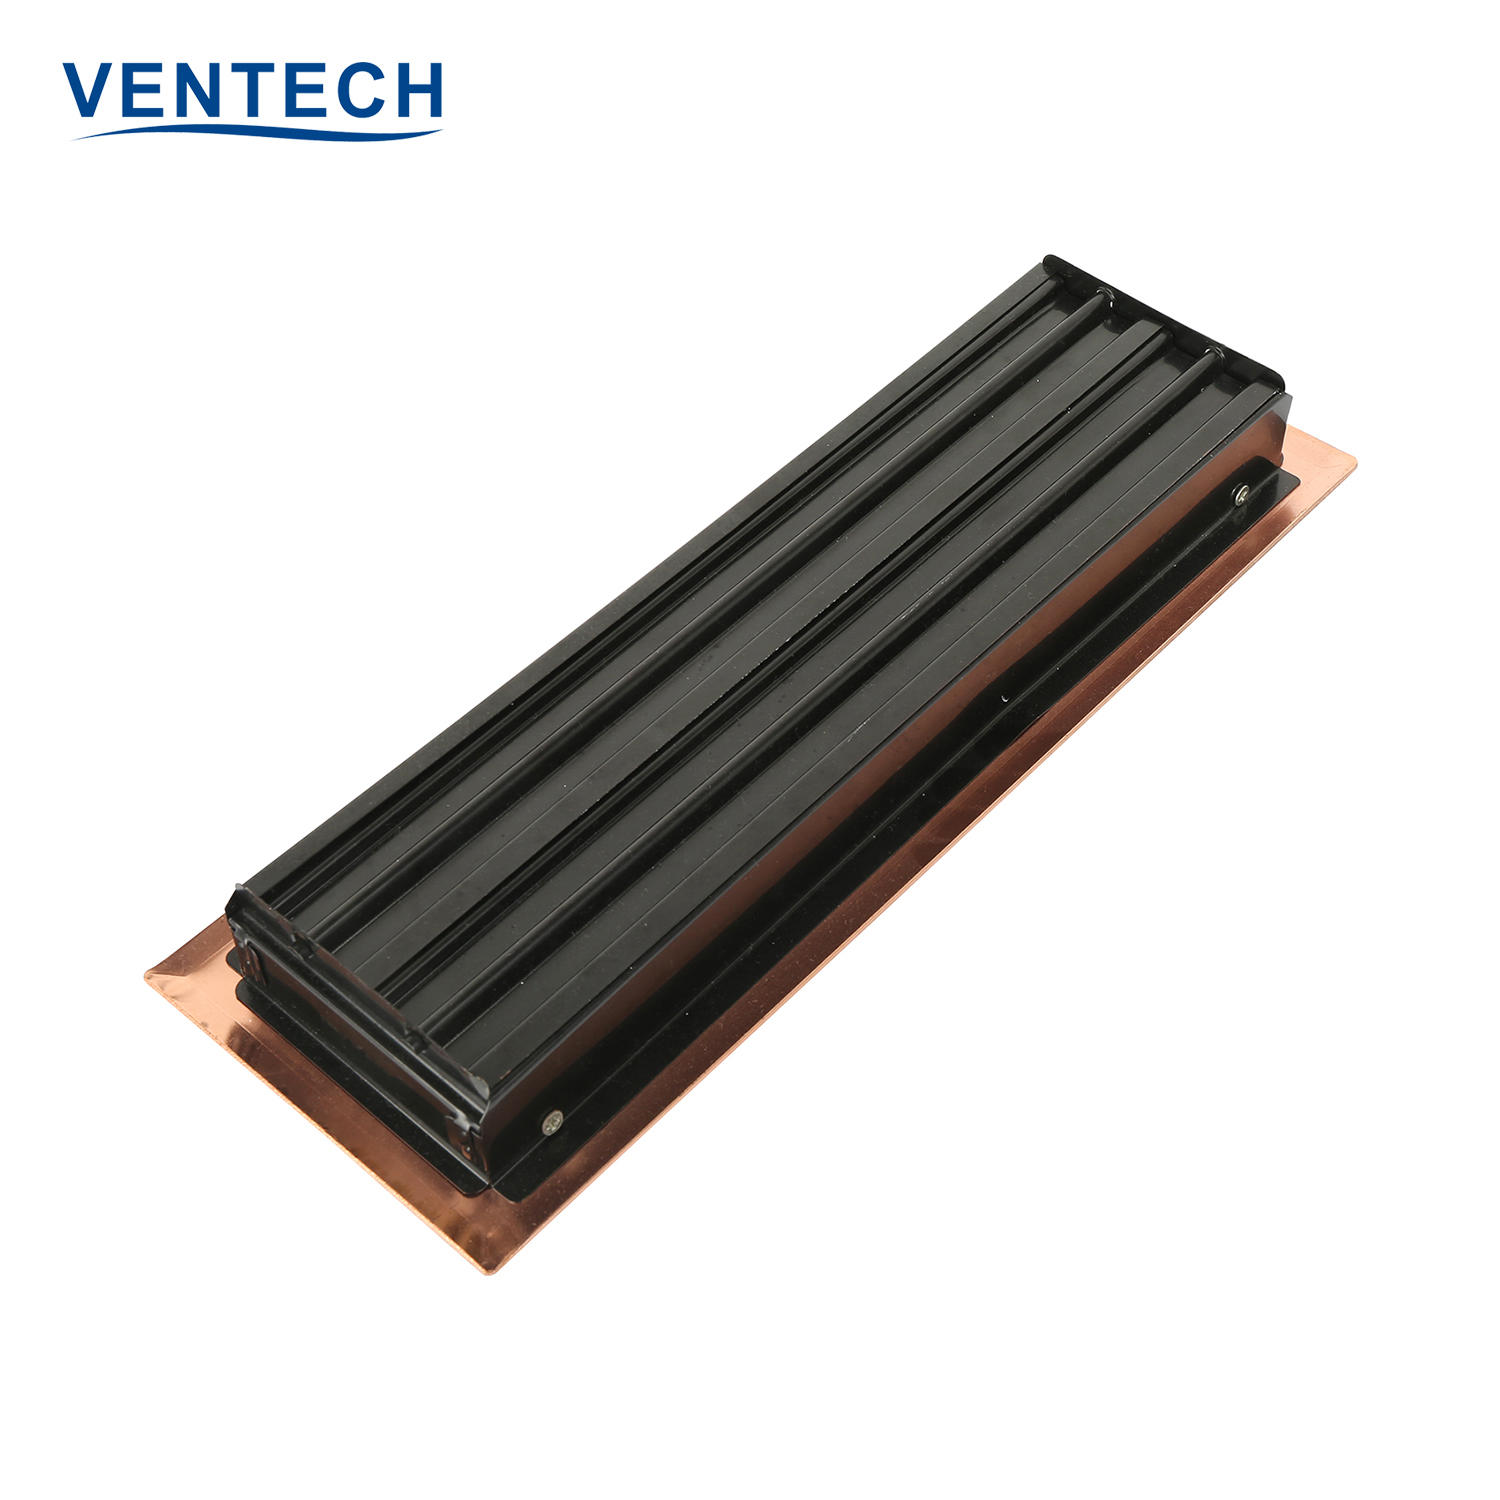 Hvac System Aircon Grill Exhaust Conditioning Ventilation Aluminum Supply Fresh Air Wall Floor Vent Grille